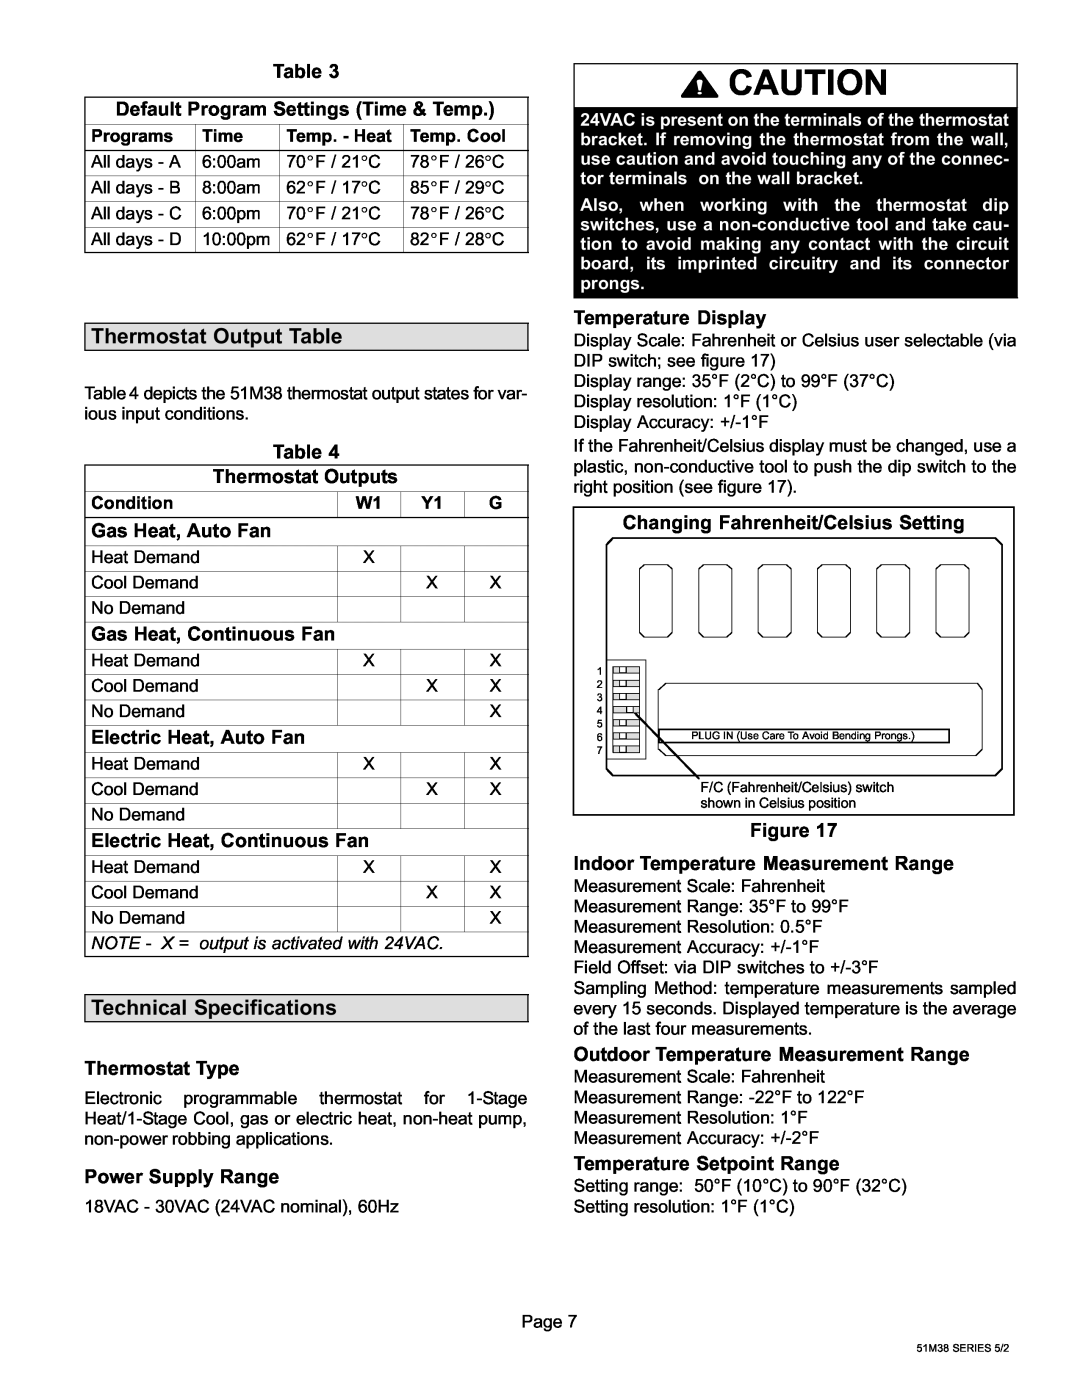 Lennox International Inc 51M37 operation manual Thermostat Output Table, Technical Specifications 